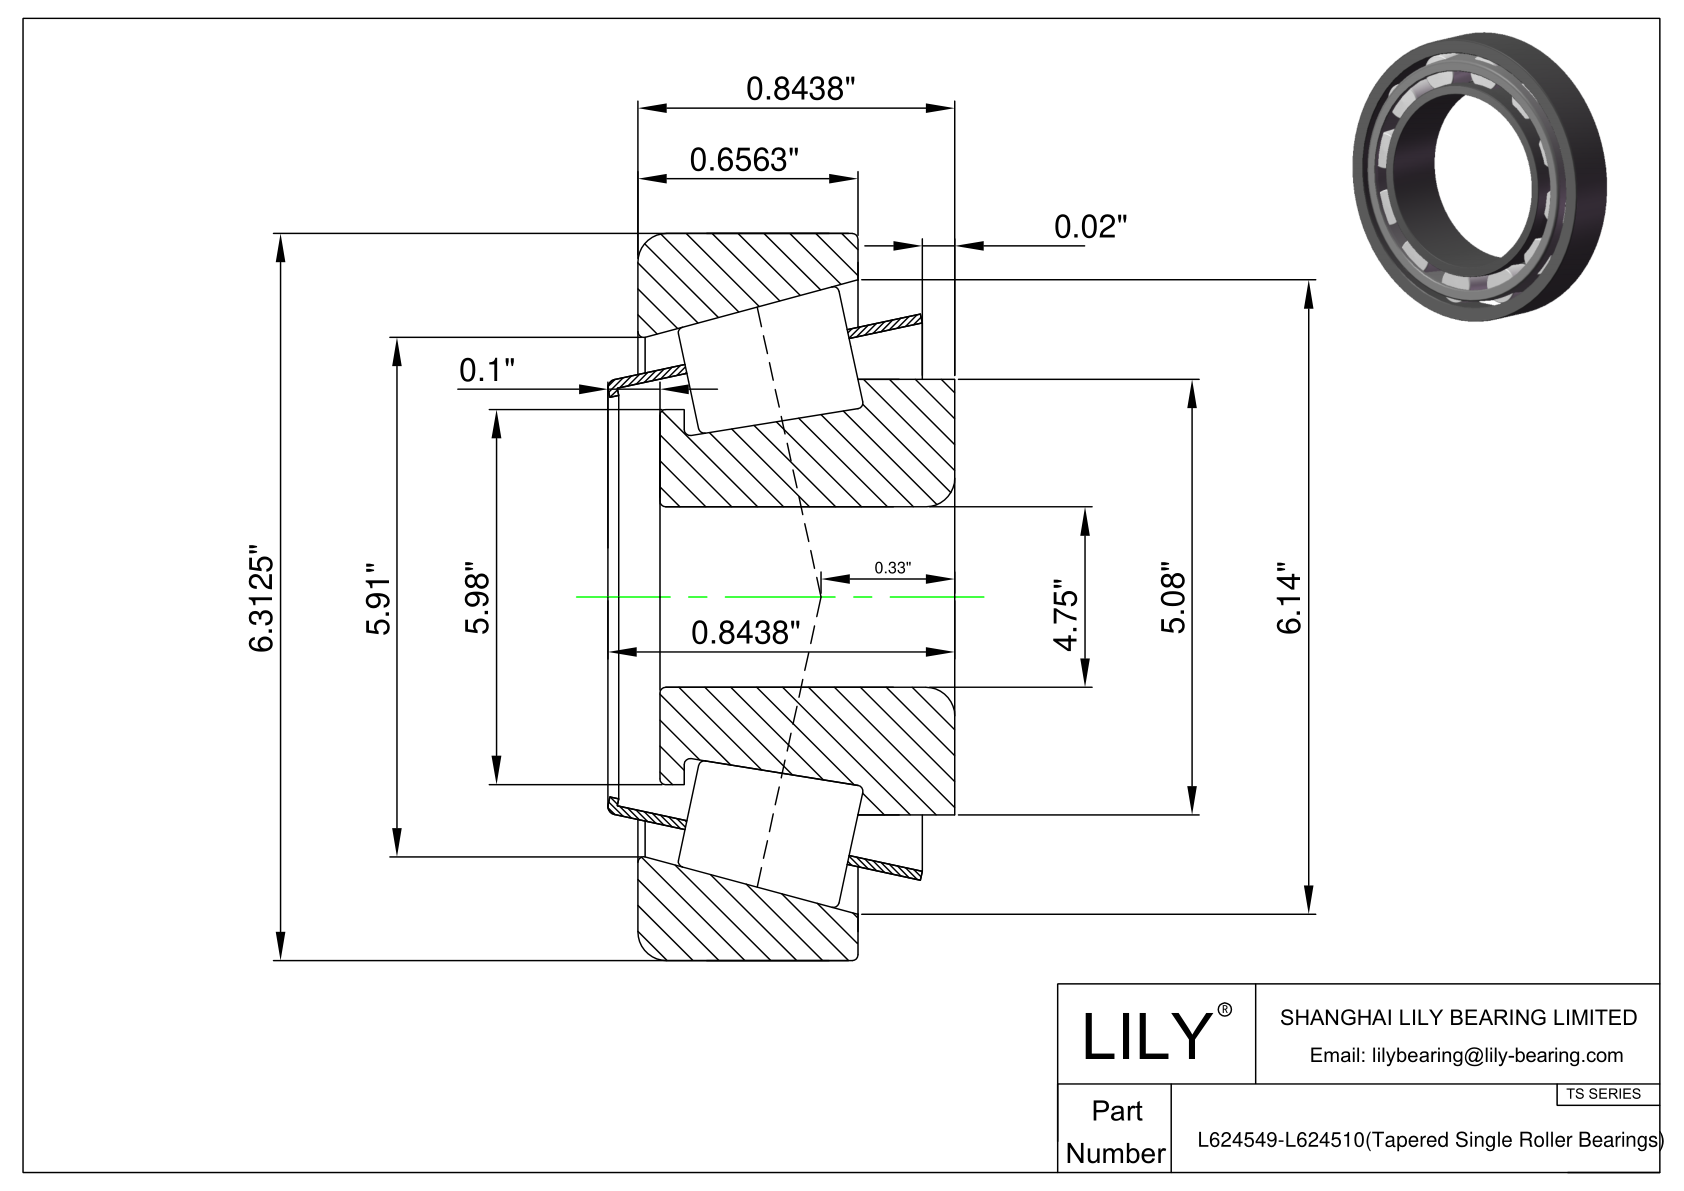 L624549-L624510 TS (Tapered Single Roller Bearings) (Imperial) cad drawing